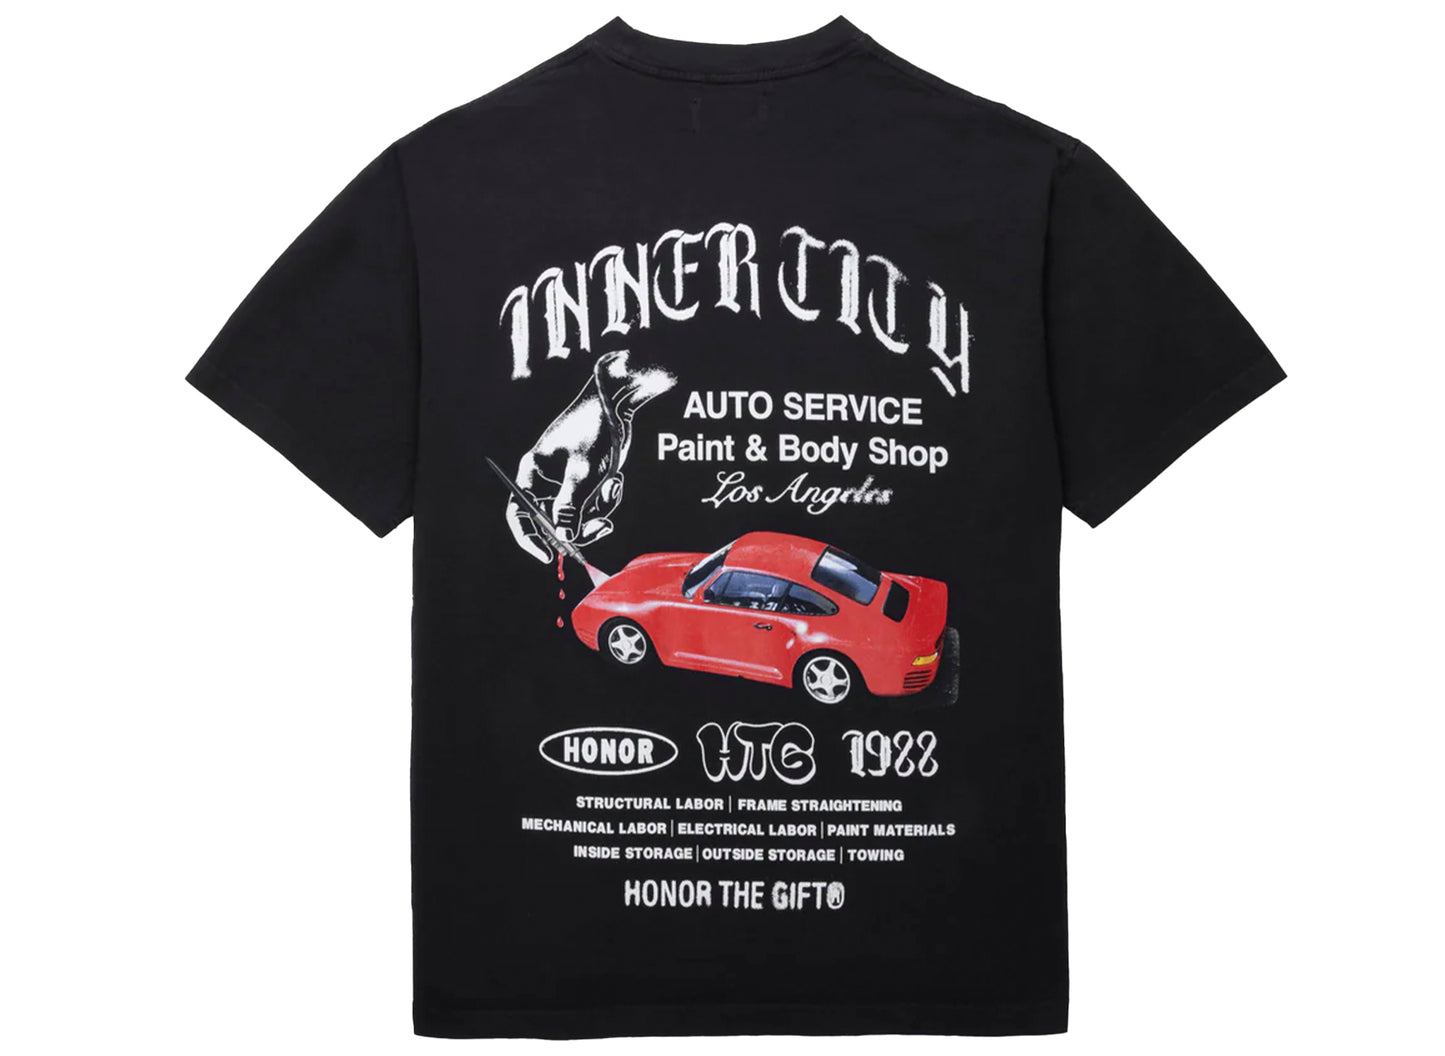 Honor the Gift Inner City Auto Service S/S Tee in Black